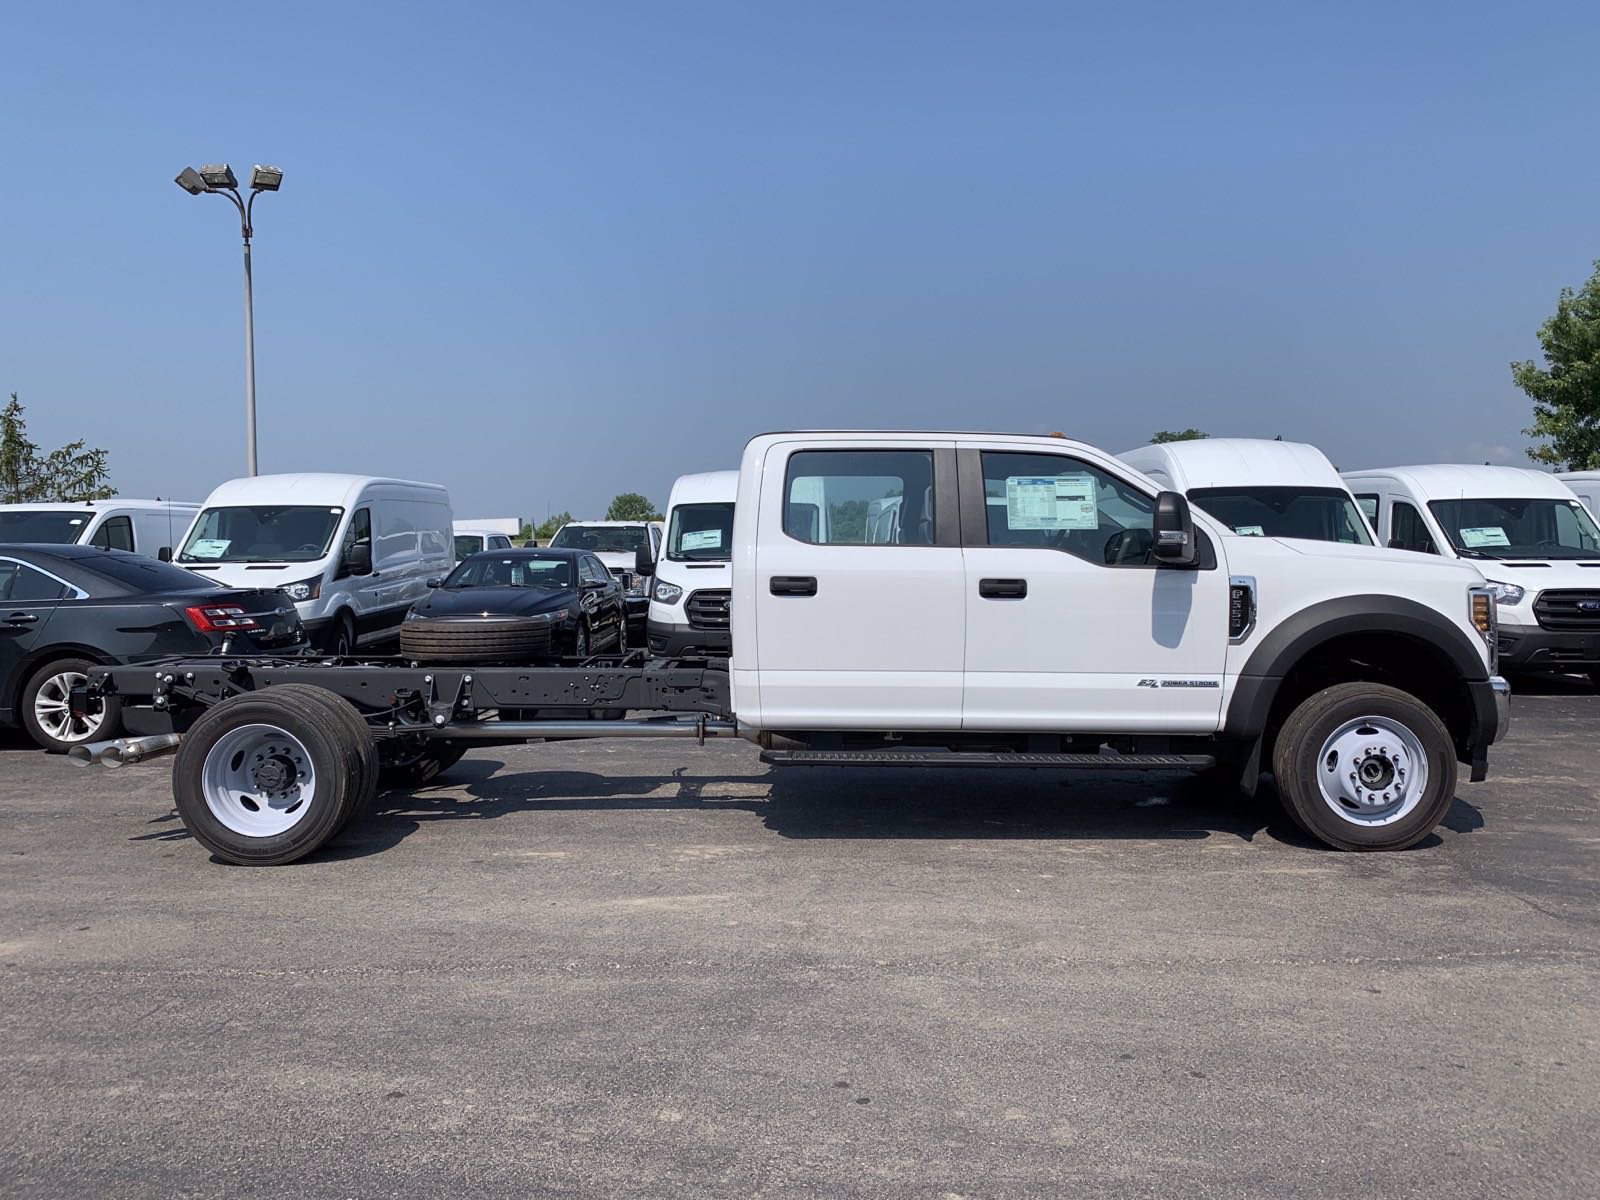 New 2019 Ford Super Duty F 550 Drw Xl 4wd Crew Cab Chassis Cab